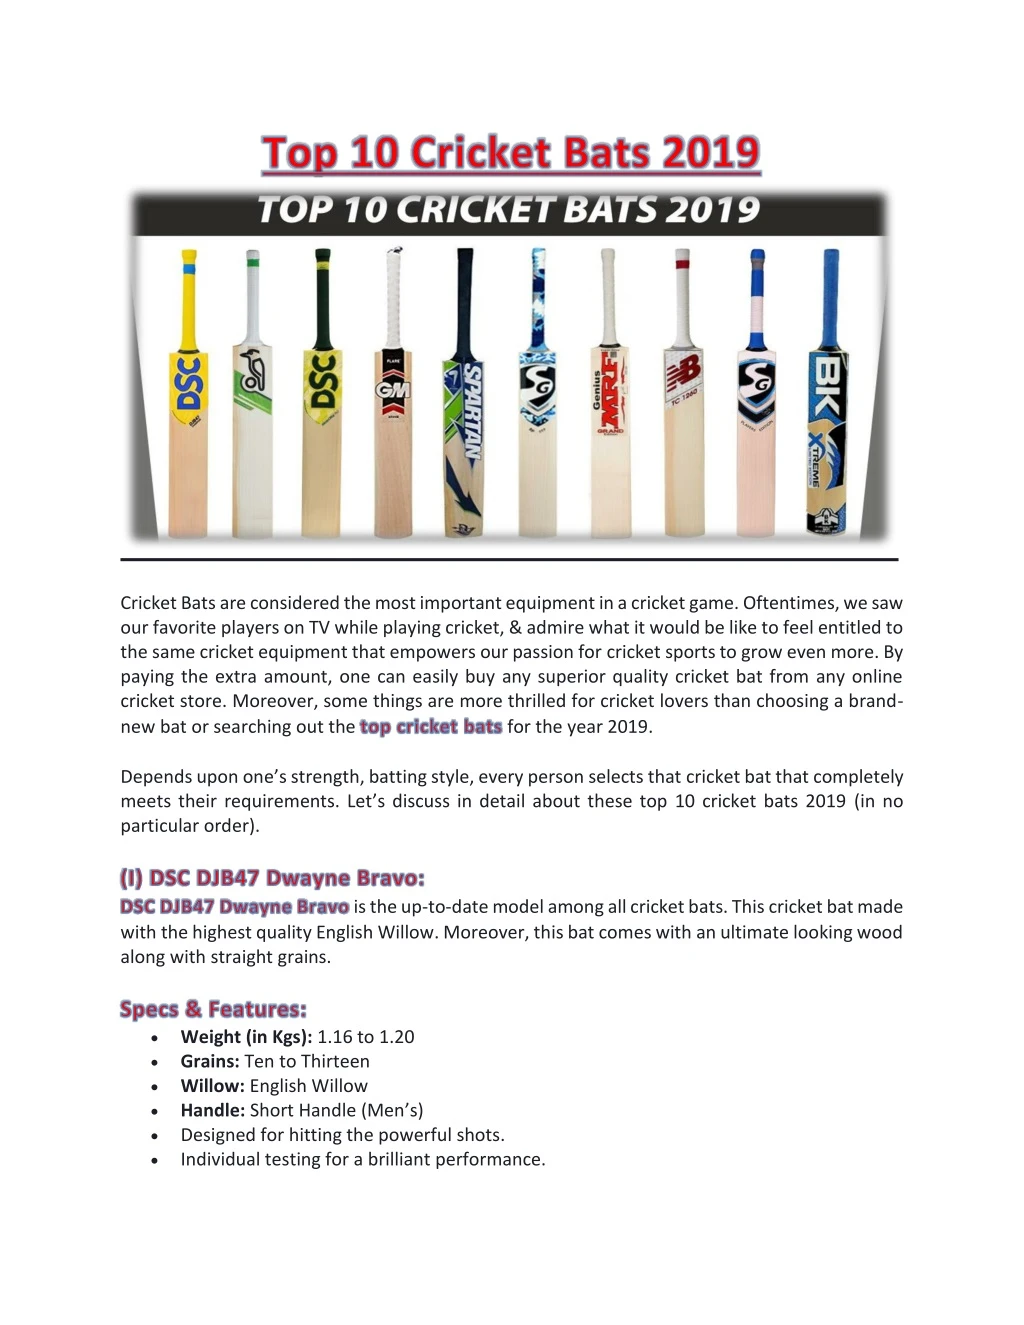 cricket bats are considered the most important